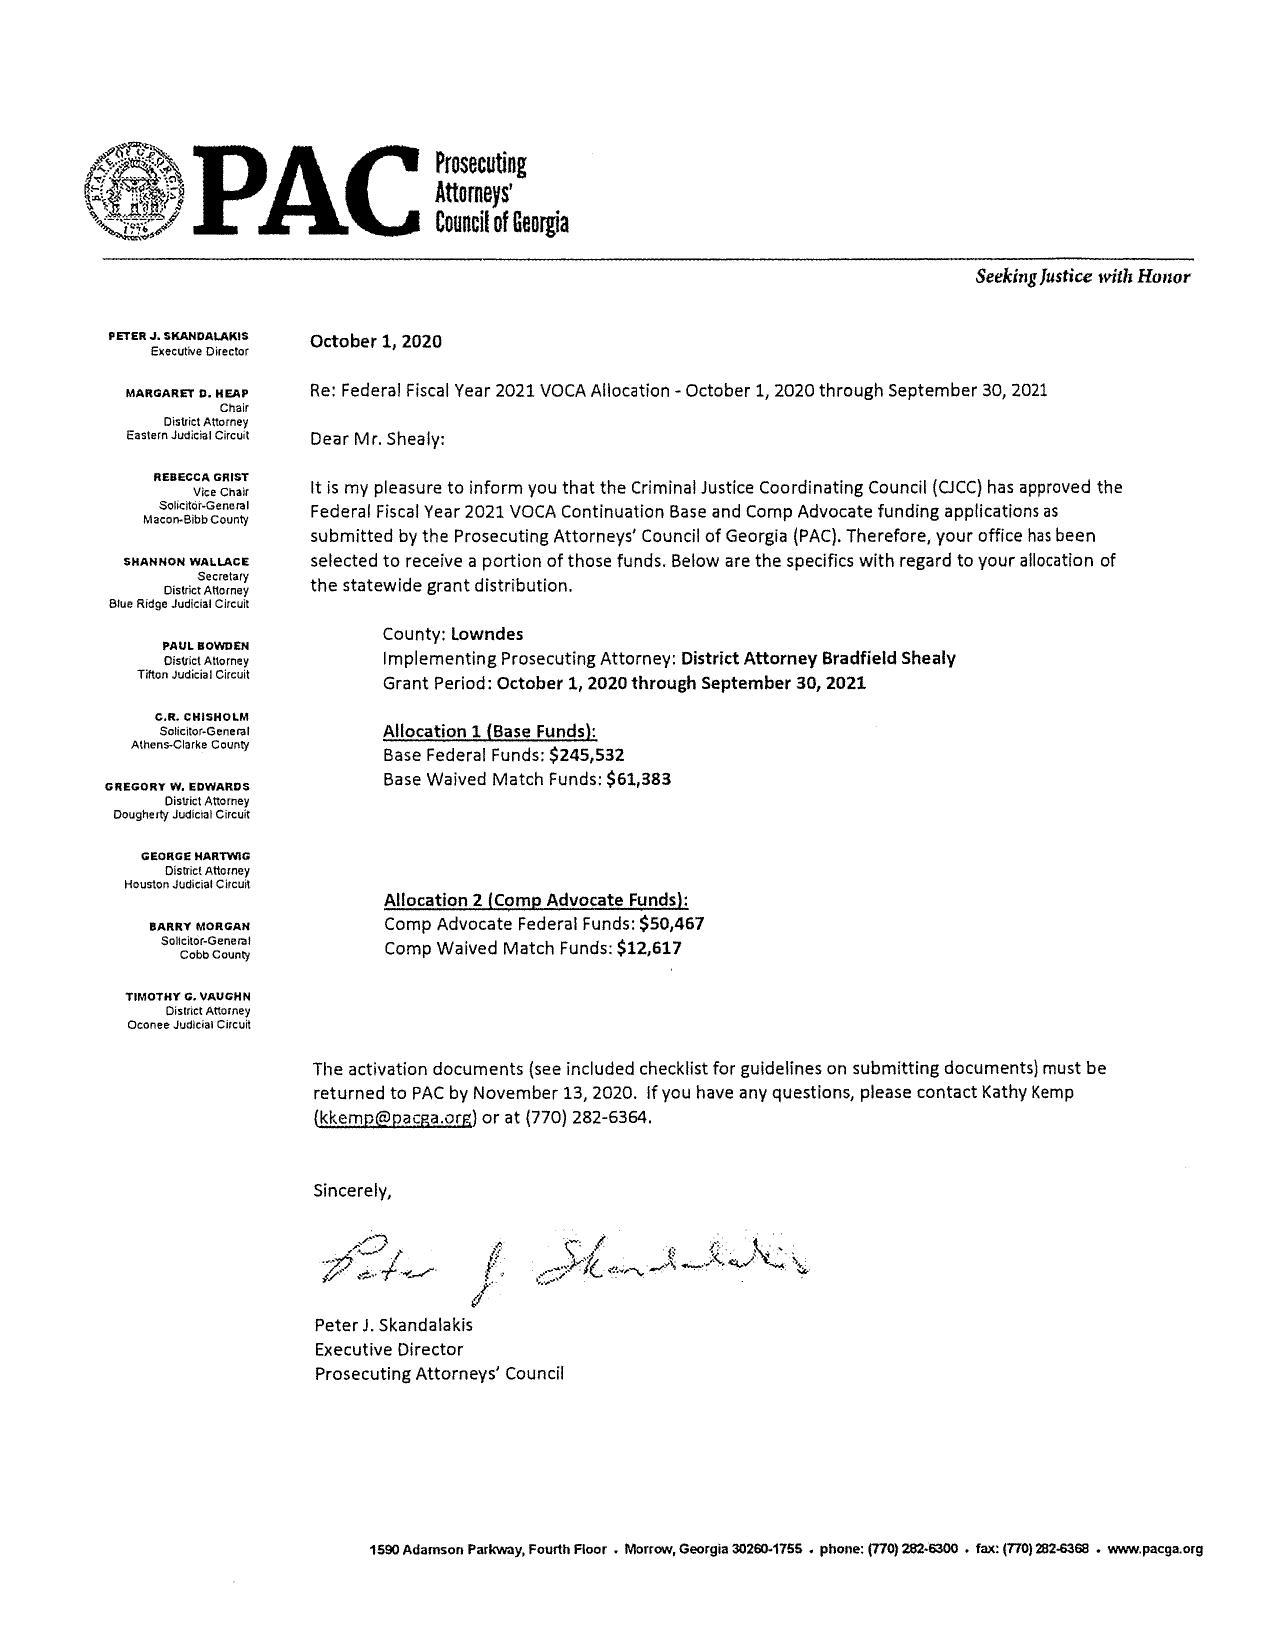 PAC letter with allocation of funds